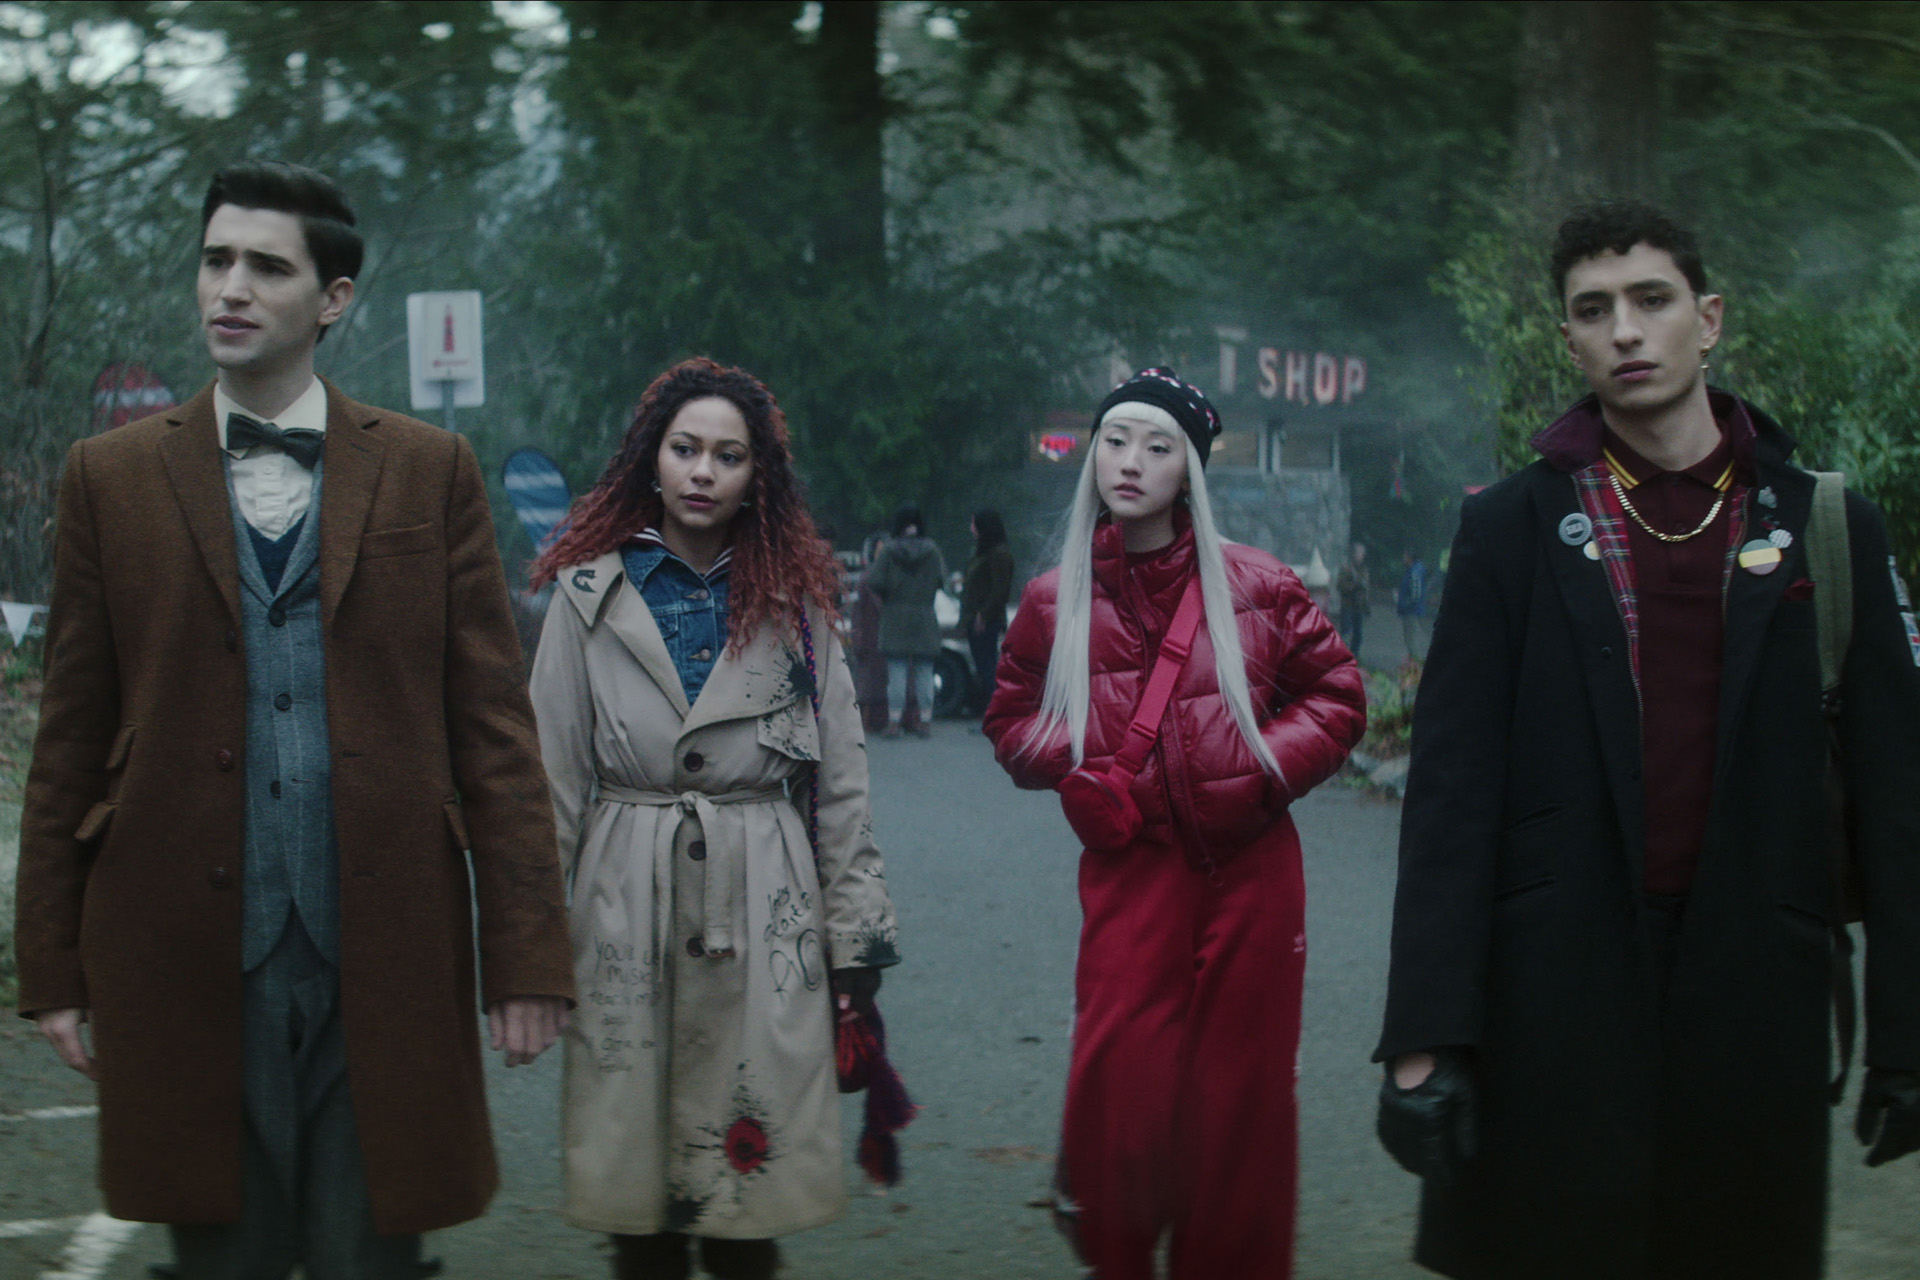 (L-R) George Rexstrew as Edwin Payne, Kassius Nelson as Crystal Palace, Yuyu Kitamura as Niko Sasaki, and Jayden Revri as Charles Rowland in episode 4 of DEAD BOY DETECTIVES